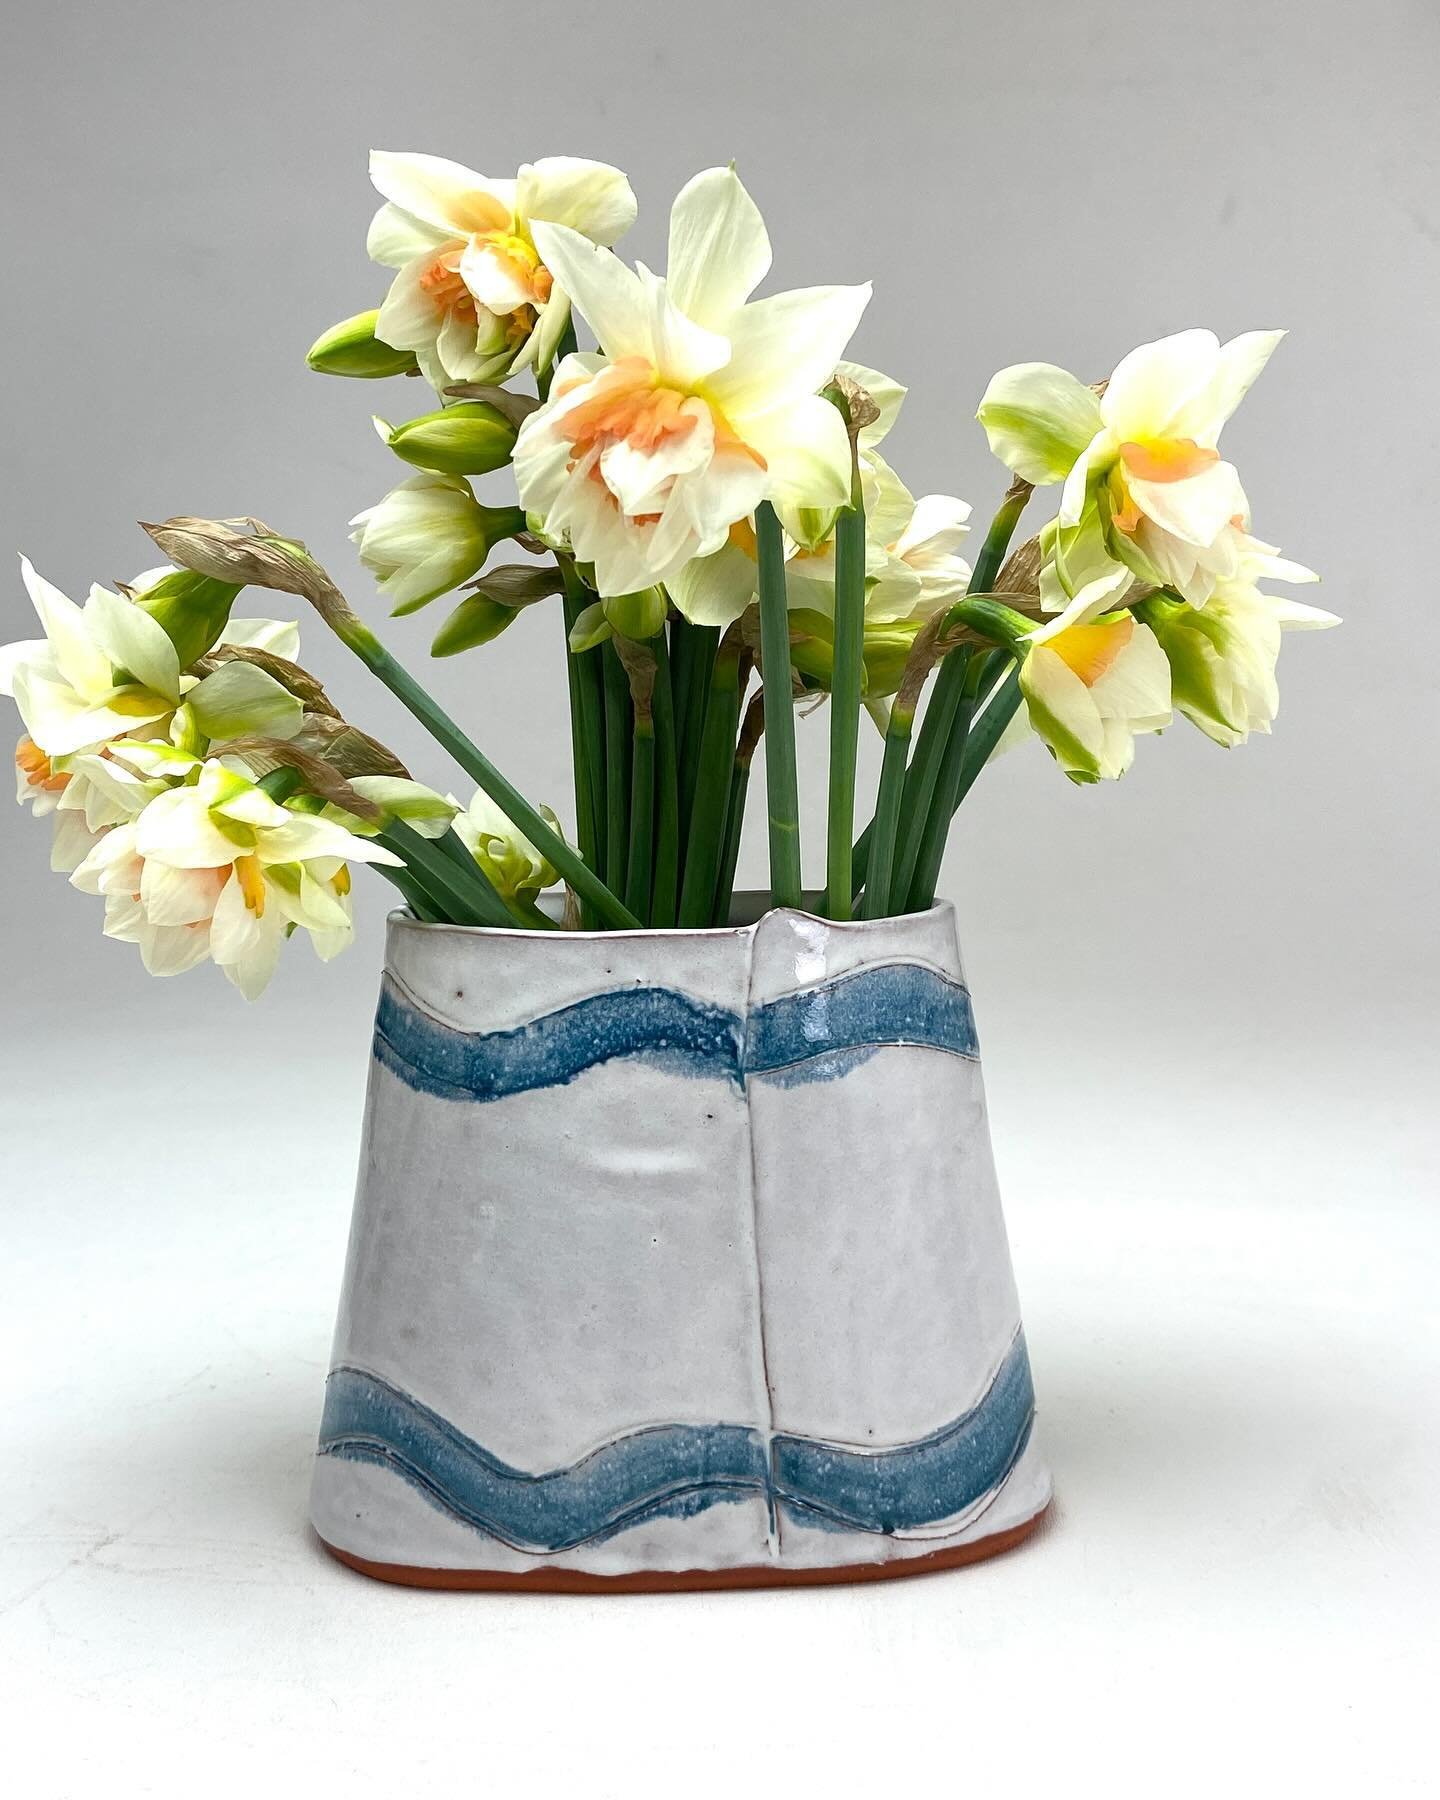 You All! Look at how cute you could style these vases with flowers!! We got vases for you, we got flowers for you, and we&rsquo;ve got a local delivery option for you! Shop the link if you want Gratitude Ceramics to 💯 handle your Mother&rsquo;s Day 